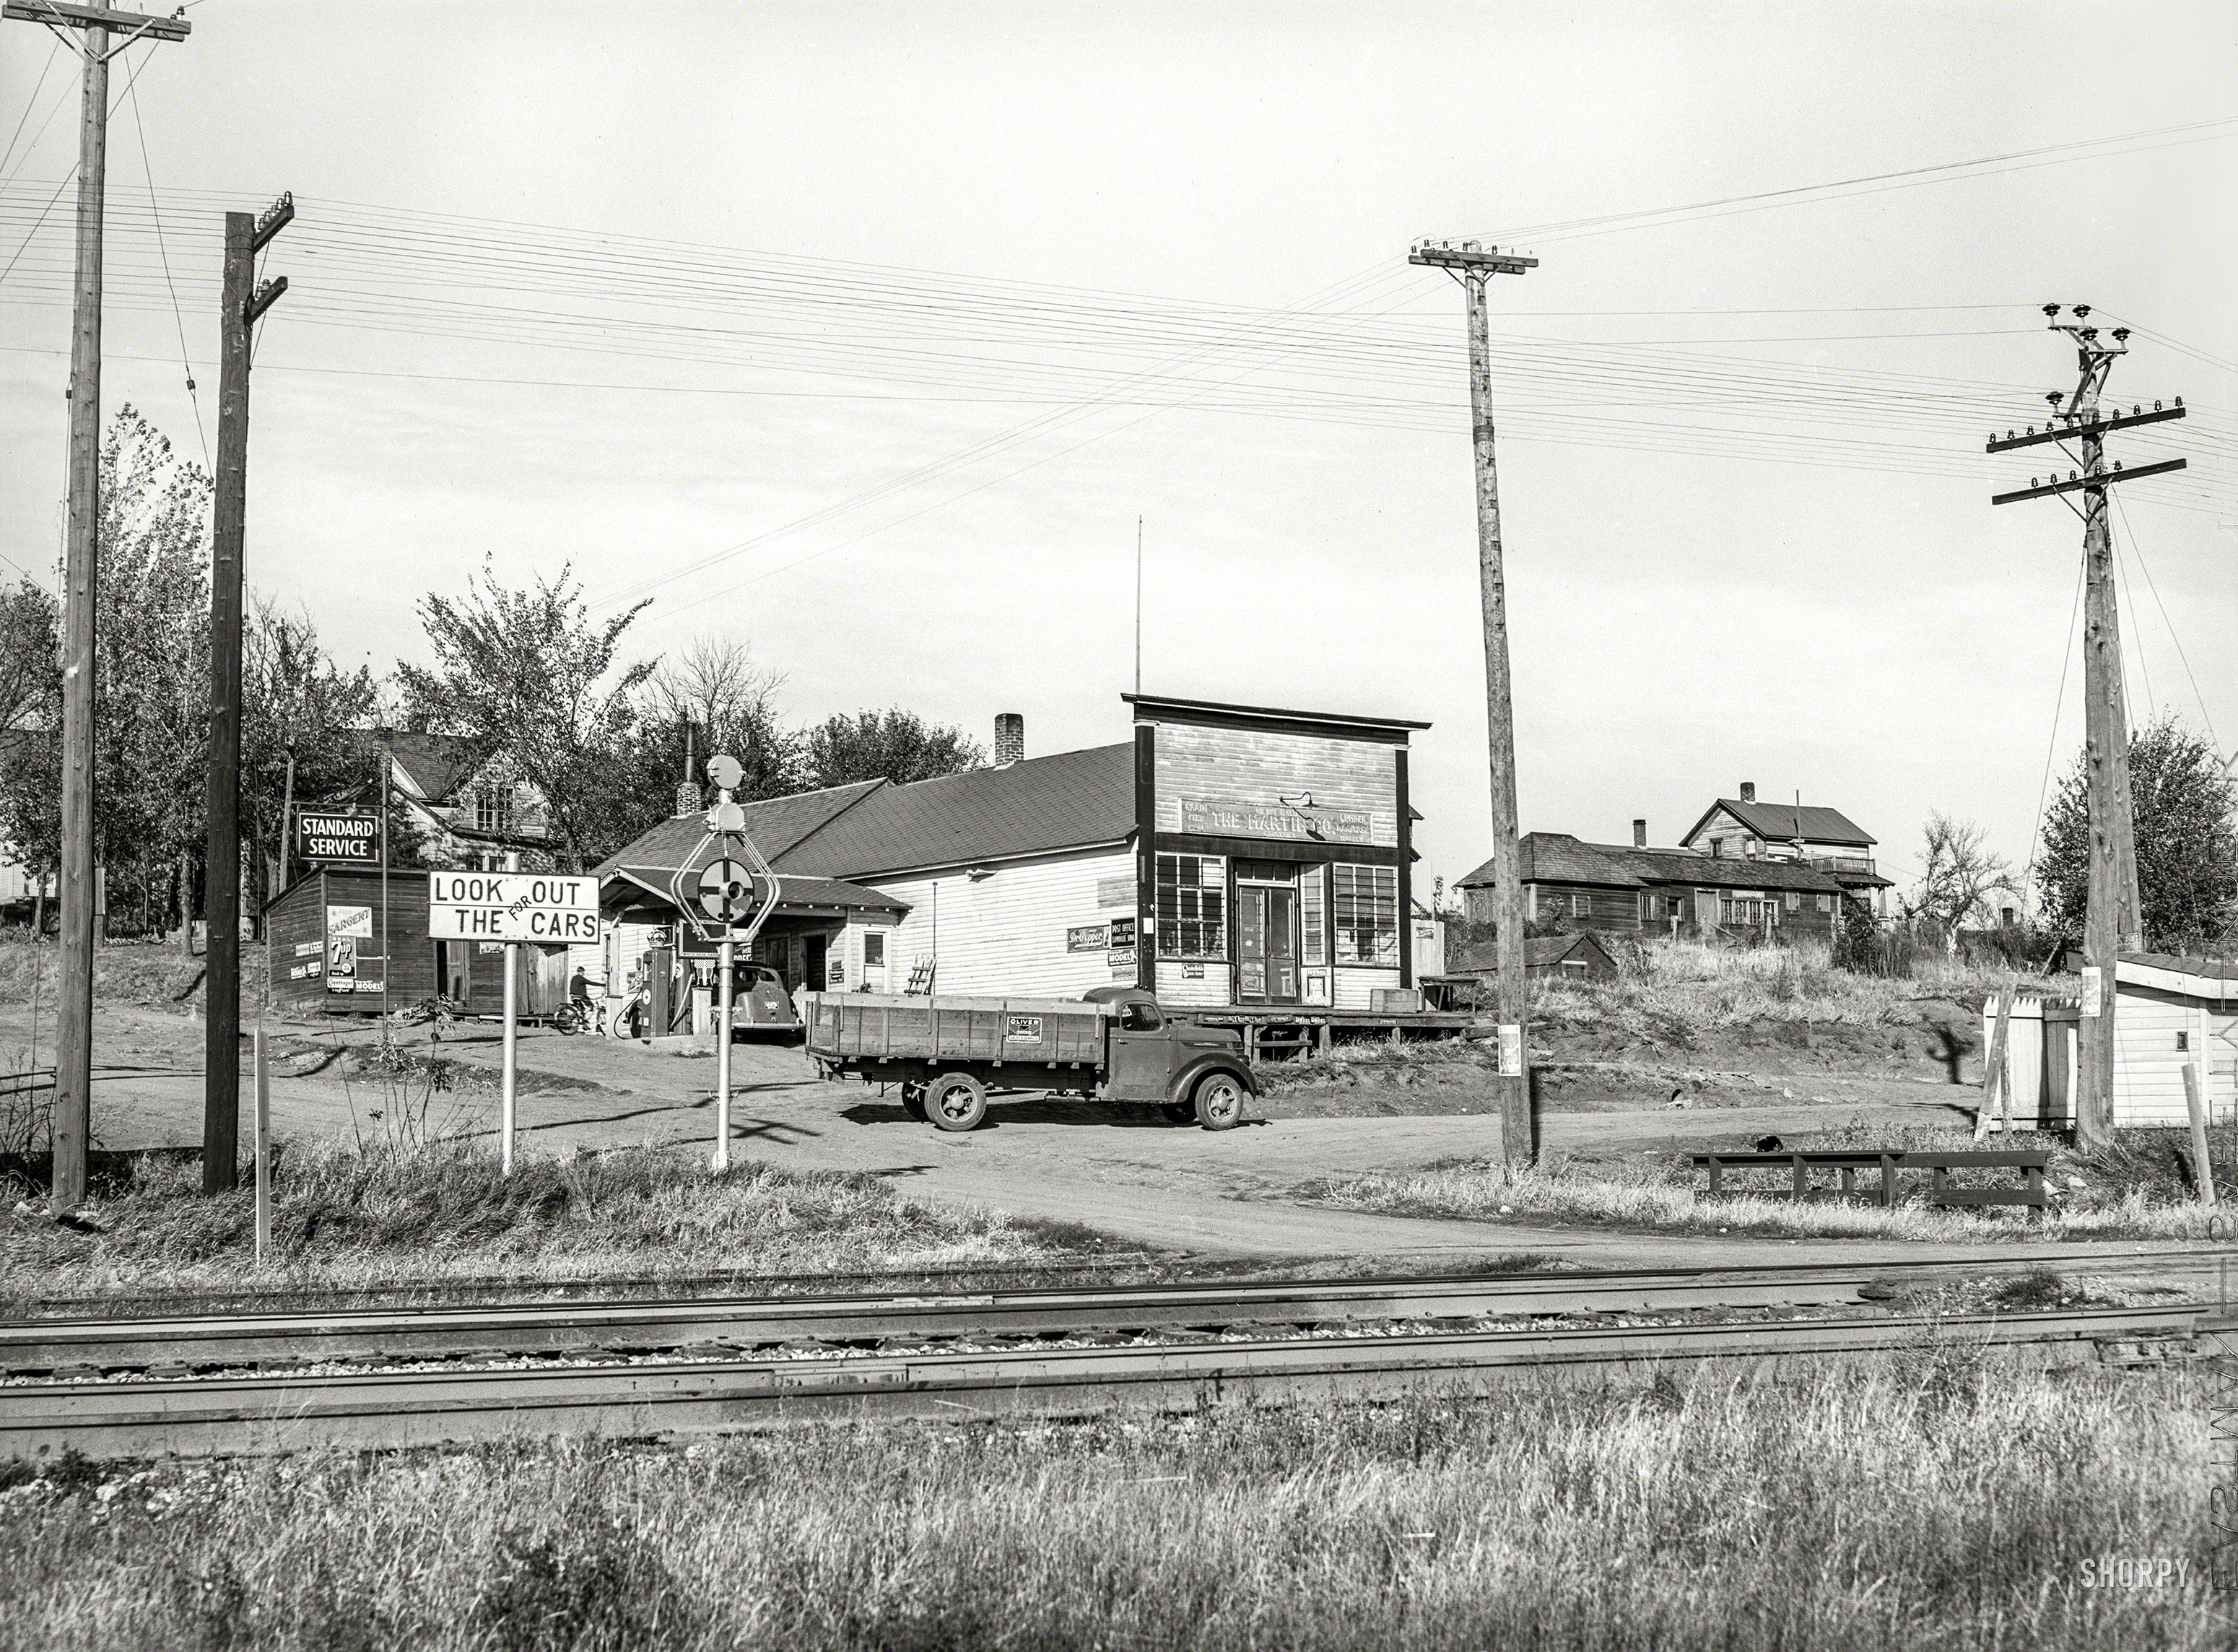 October 1939. "Lamoille, Iowa. A village consisting of a few houses, general store, and railroad station." Medium format acetate negative by Arthur Rothstein for the Farm Security Administration. View full size.